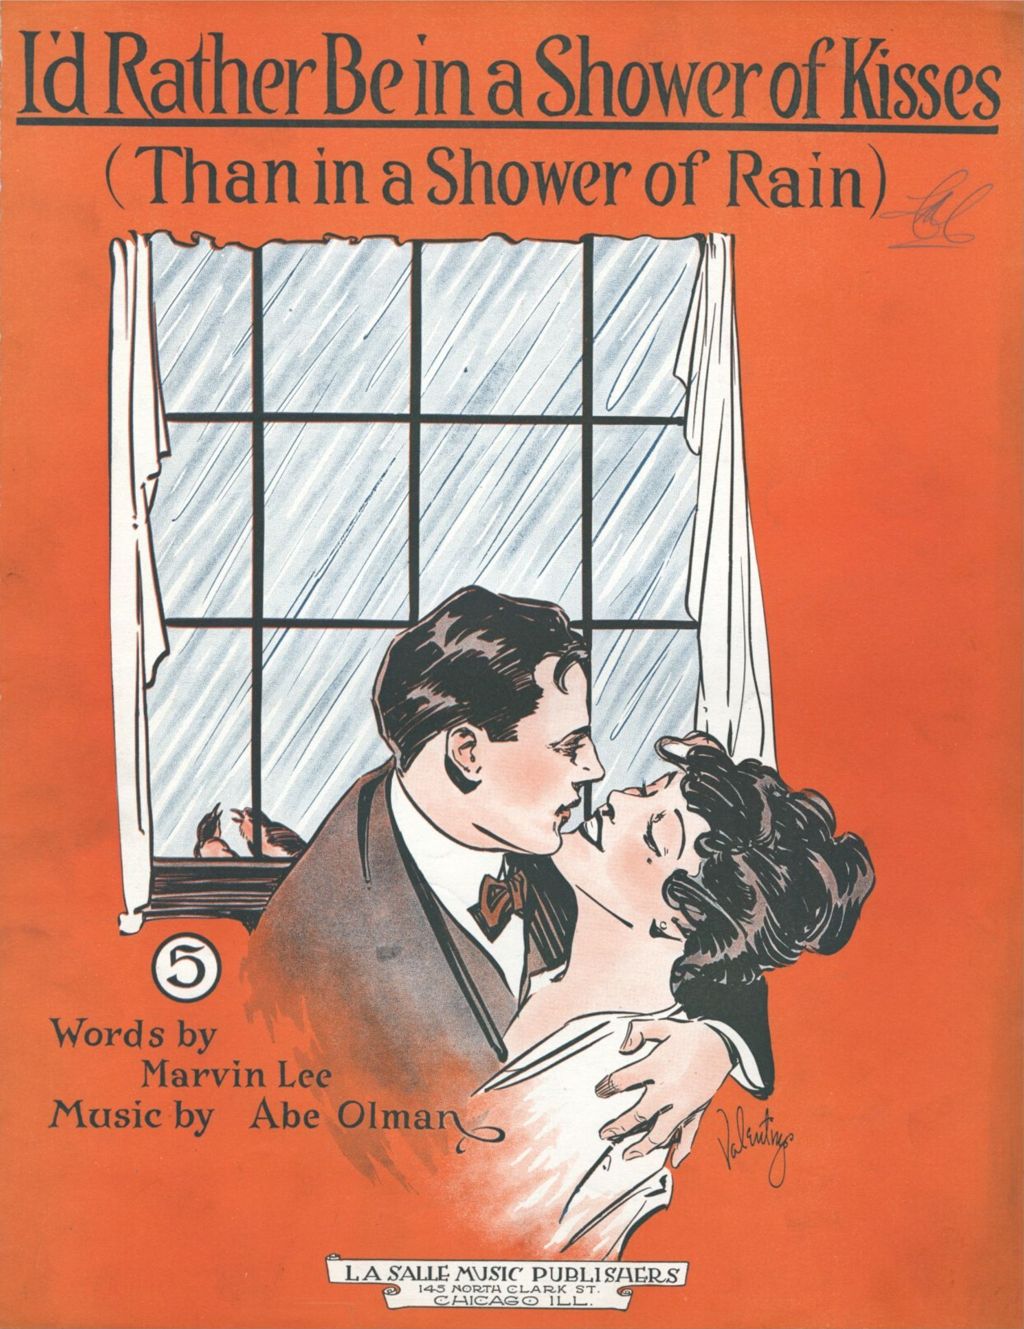 Miniature of I'd Rather Be In A Shower of Kisses (Than In a Shower of Rain)